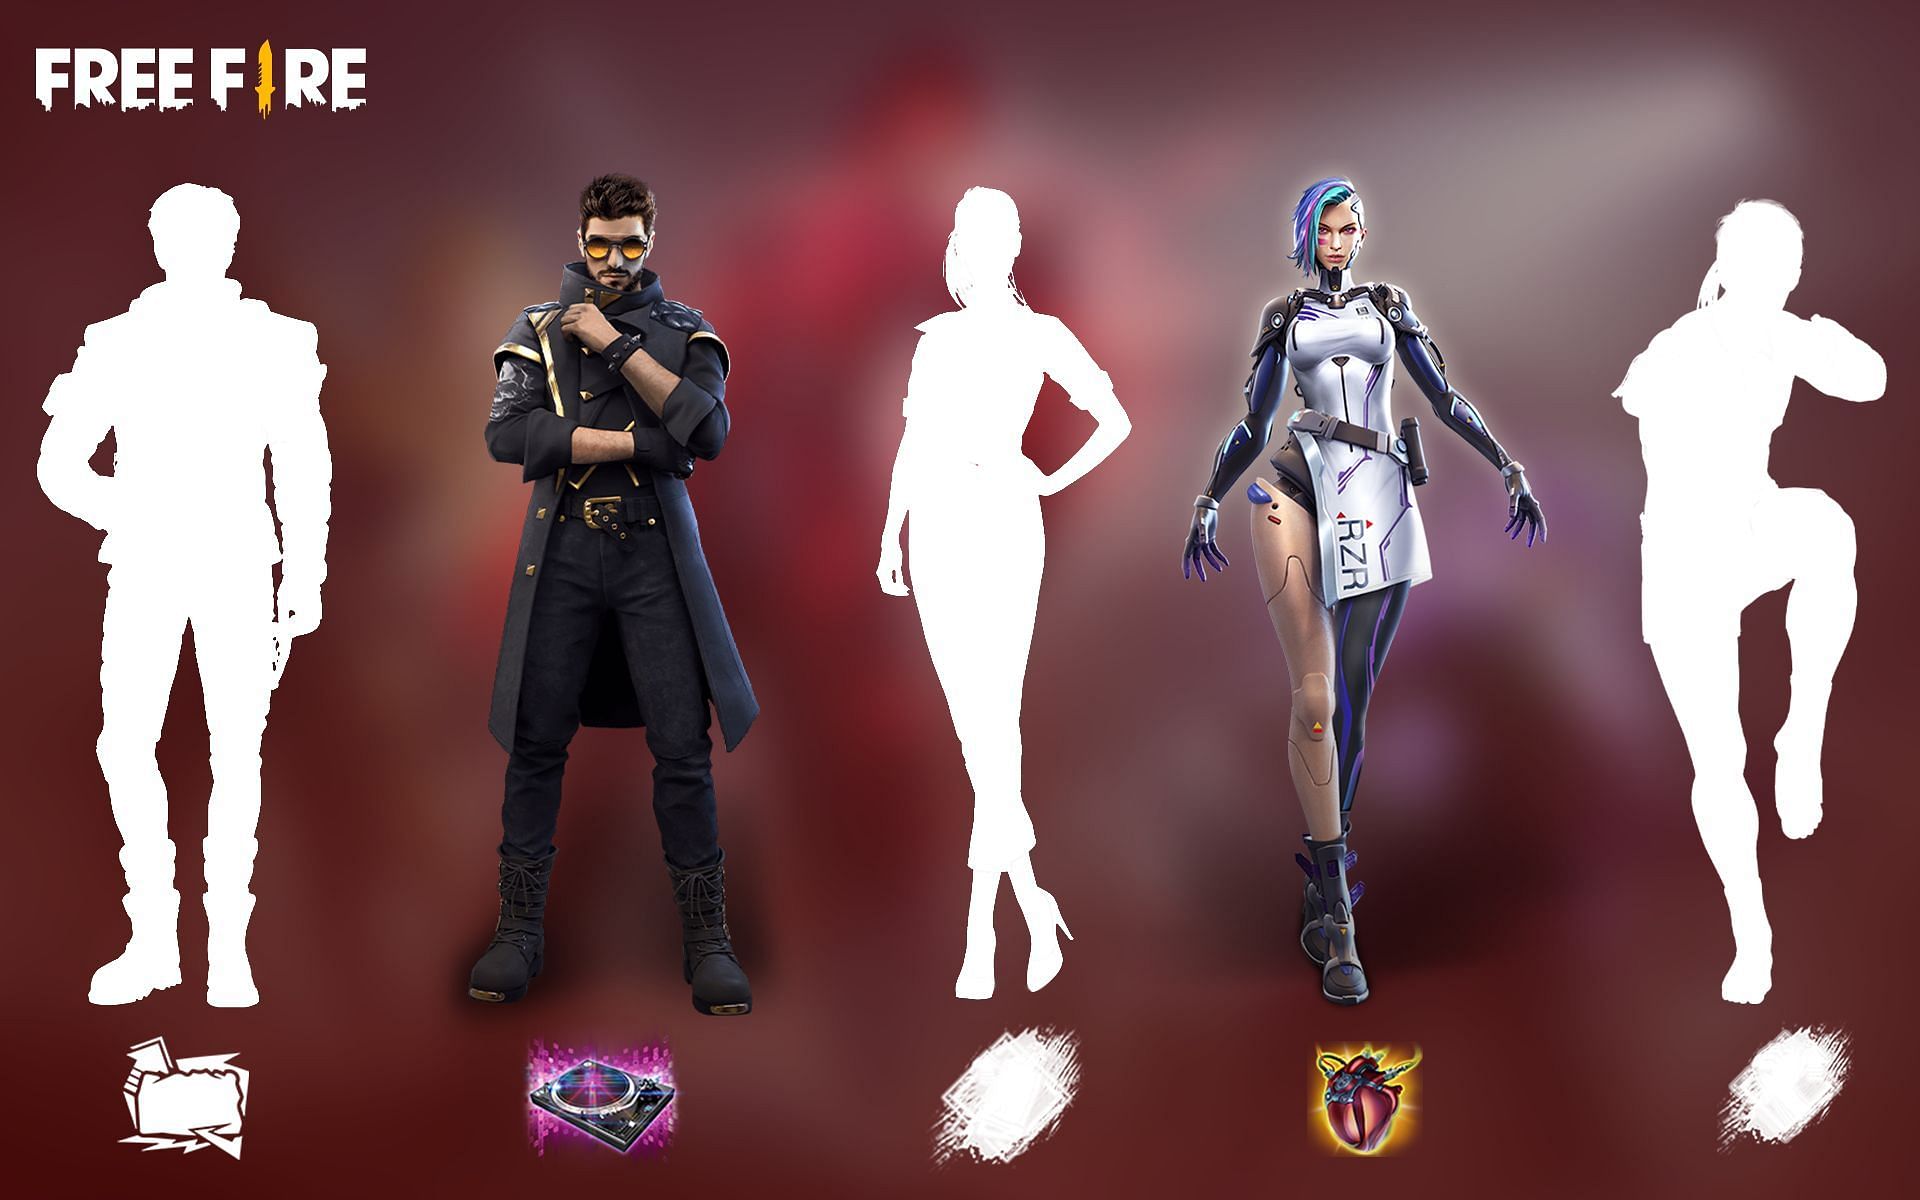 Choosing these characters will improve the odds of winning matches in Free Fire (Image via Sportskeeda)